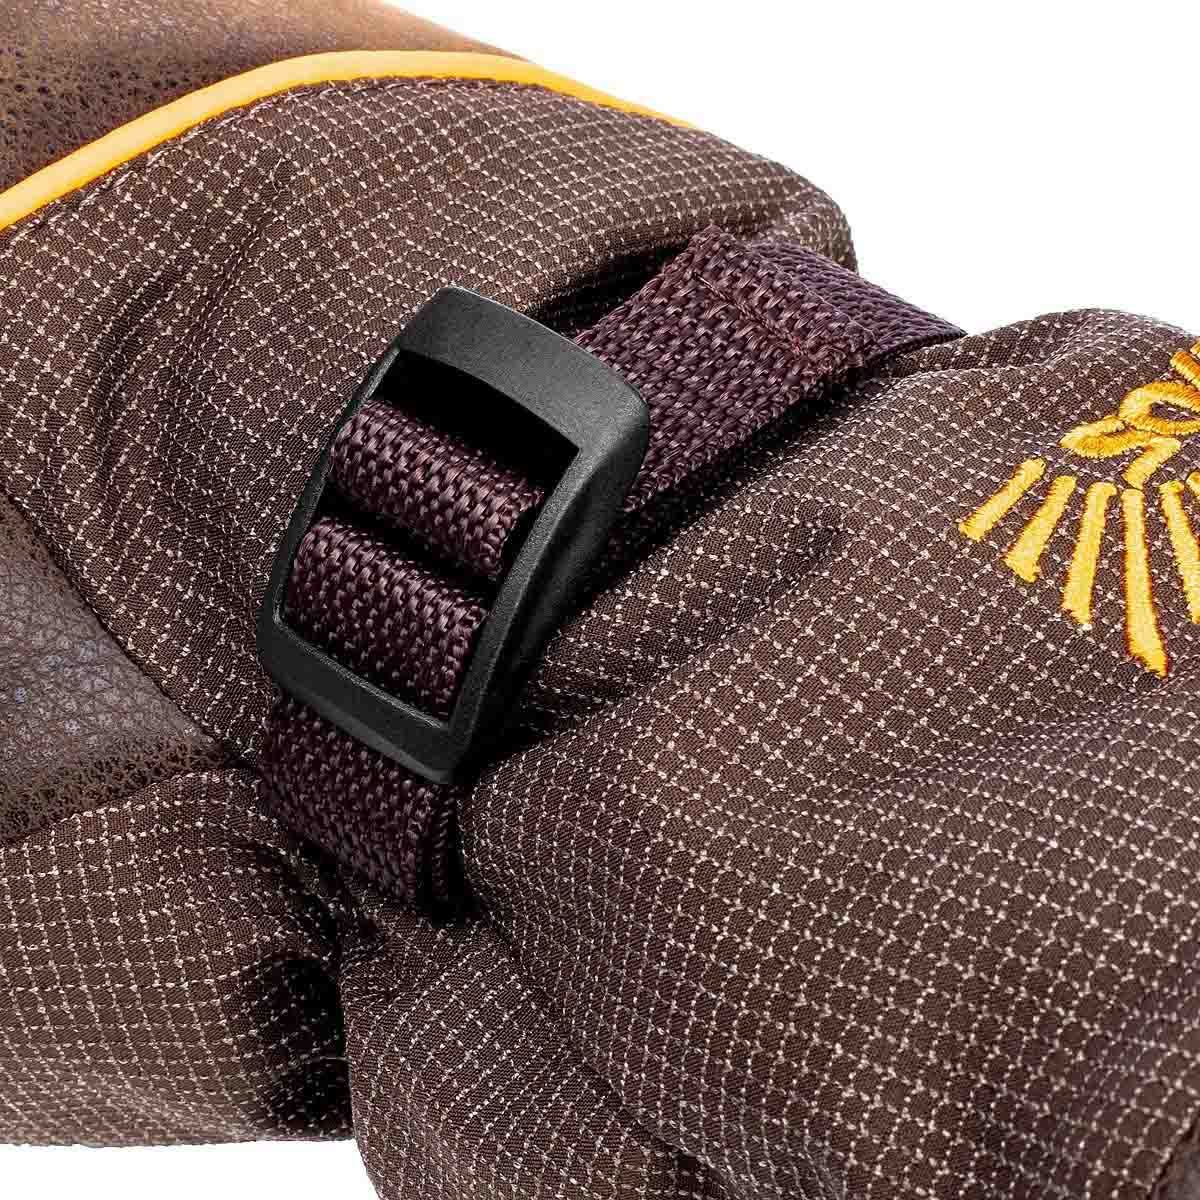 Kevlar Waterproof Tough Winter Sports Mittens for Men are equipped with elastic bands on the wrists